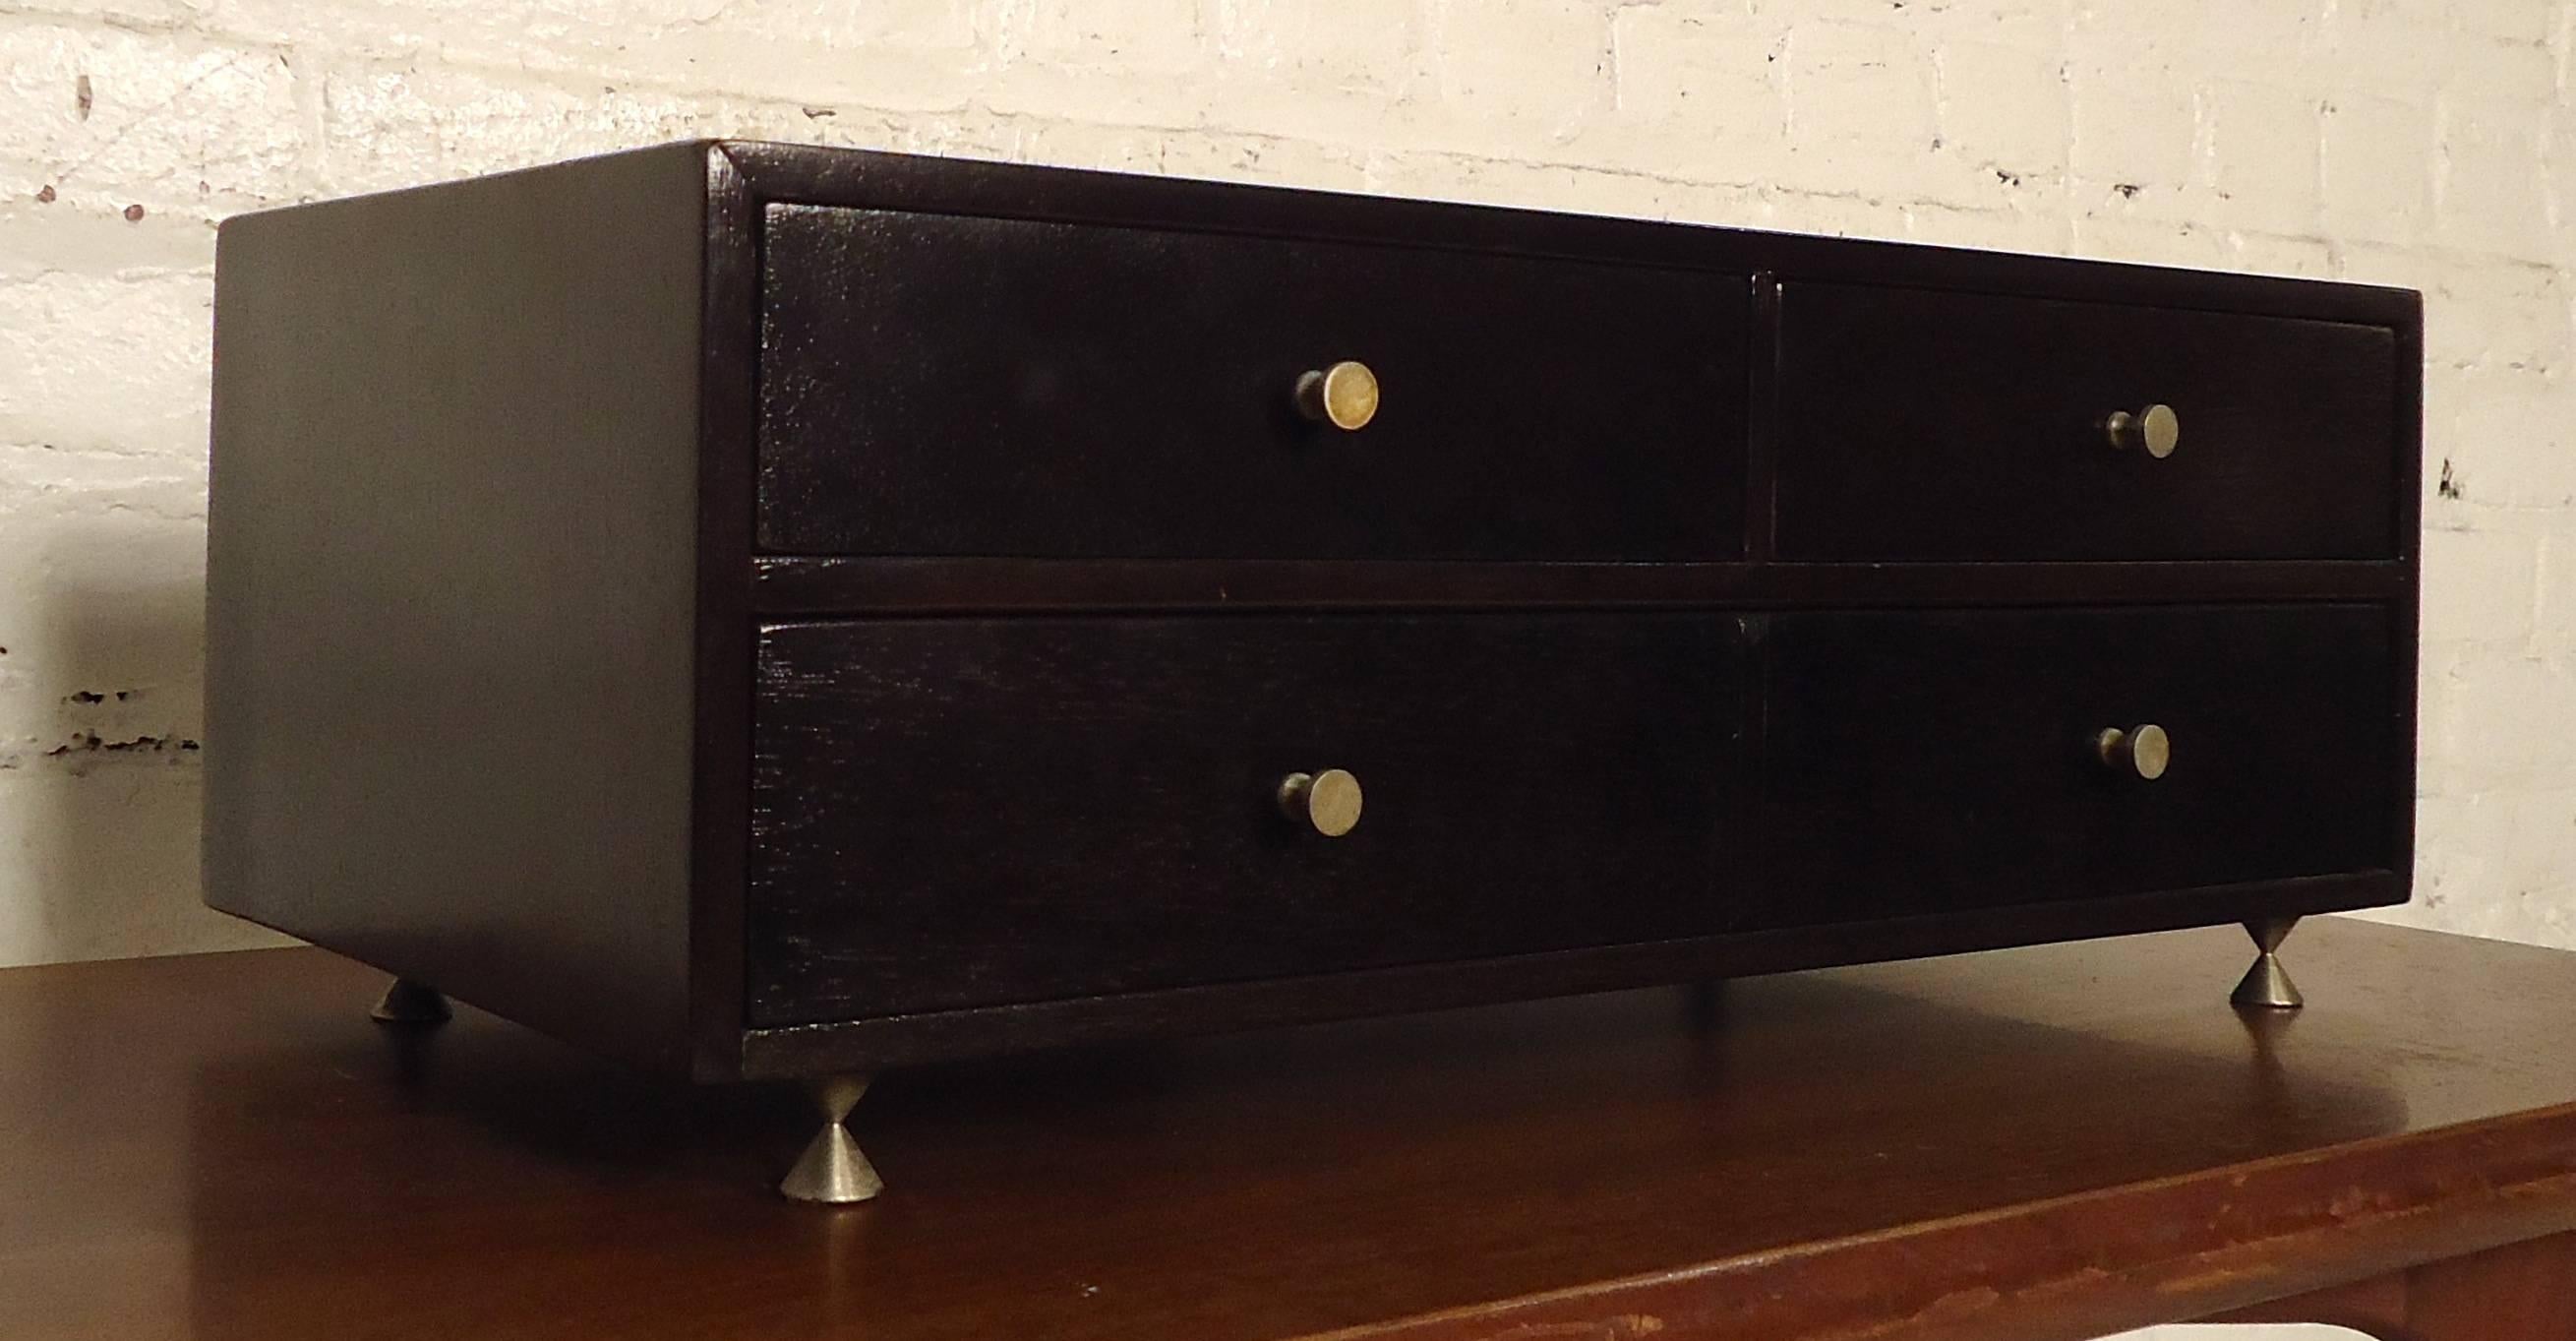 Stylish modernist jewelry box in the manner of Paul McCobb features a deep brown color lacquer finish, two top drawers, one wide bottom with dividers, chrome handles and legs.

Please confirm item location (NY or NJ).